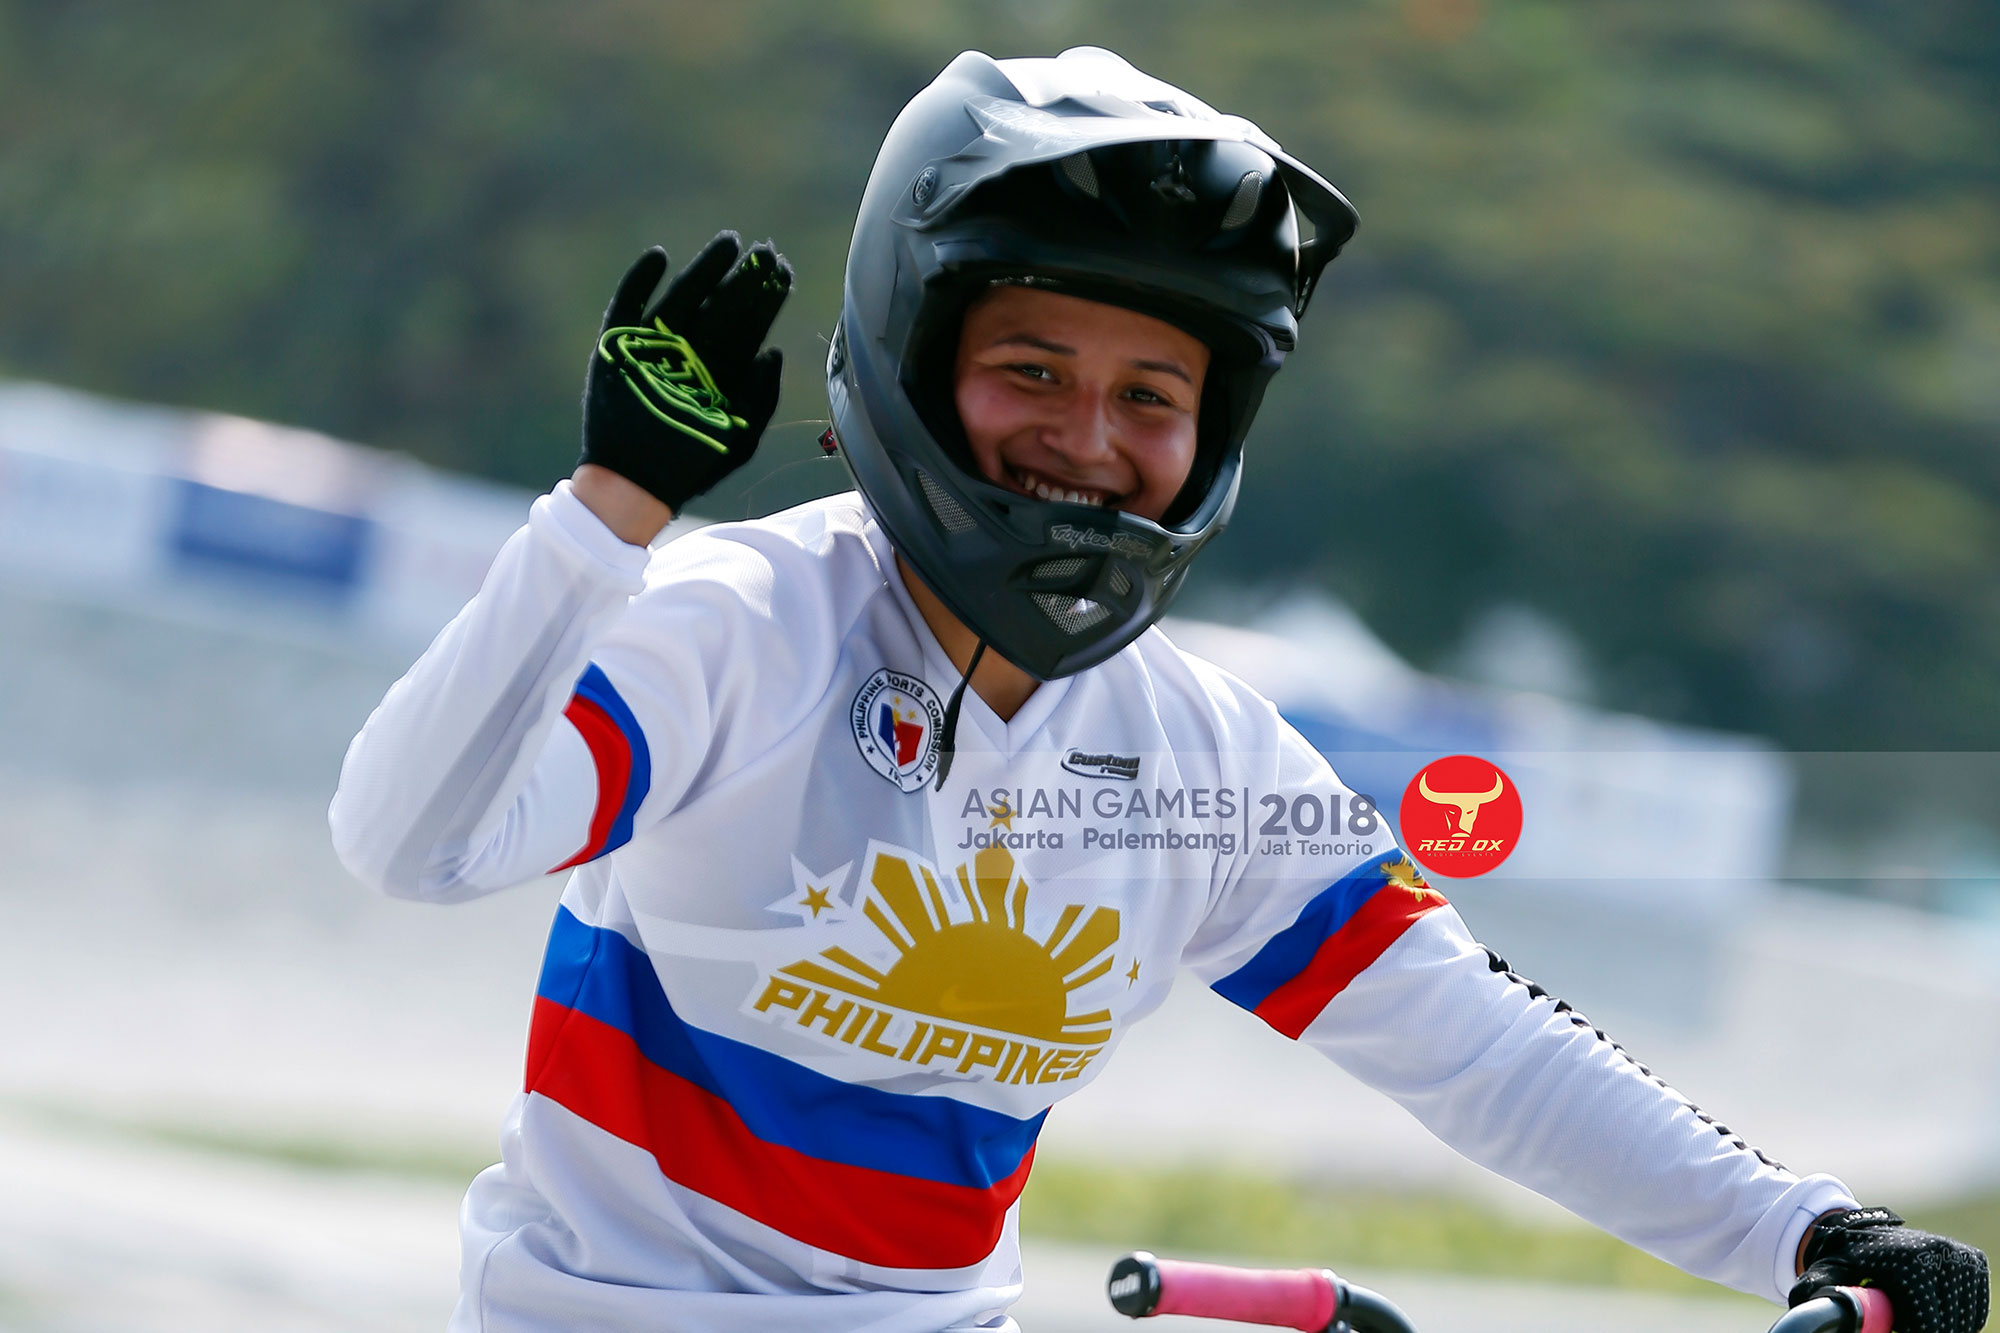 Asian Games 2018 Cycling – Sienna Elaine Fines